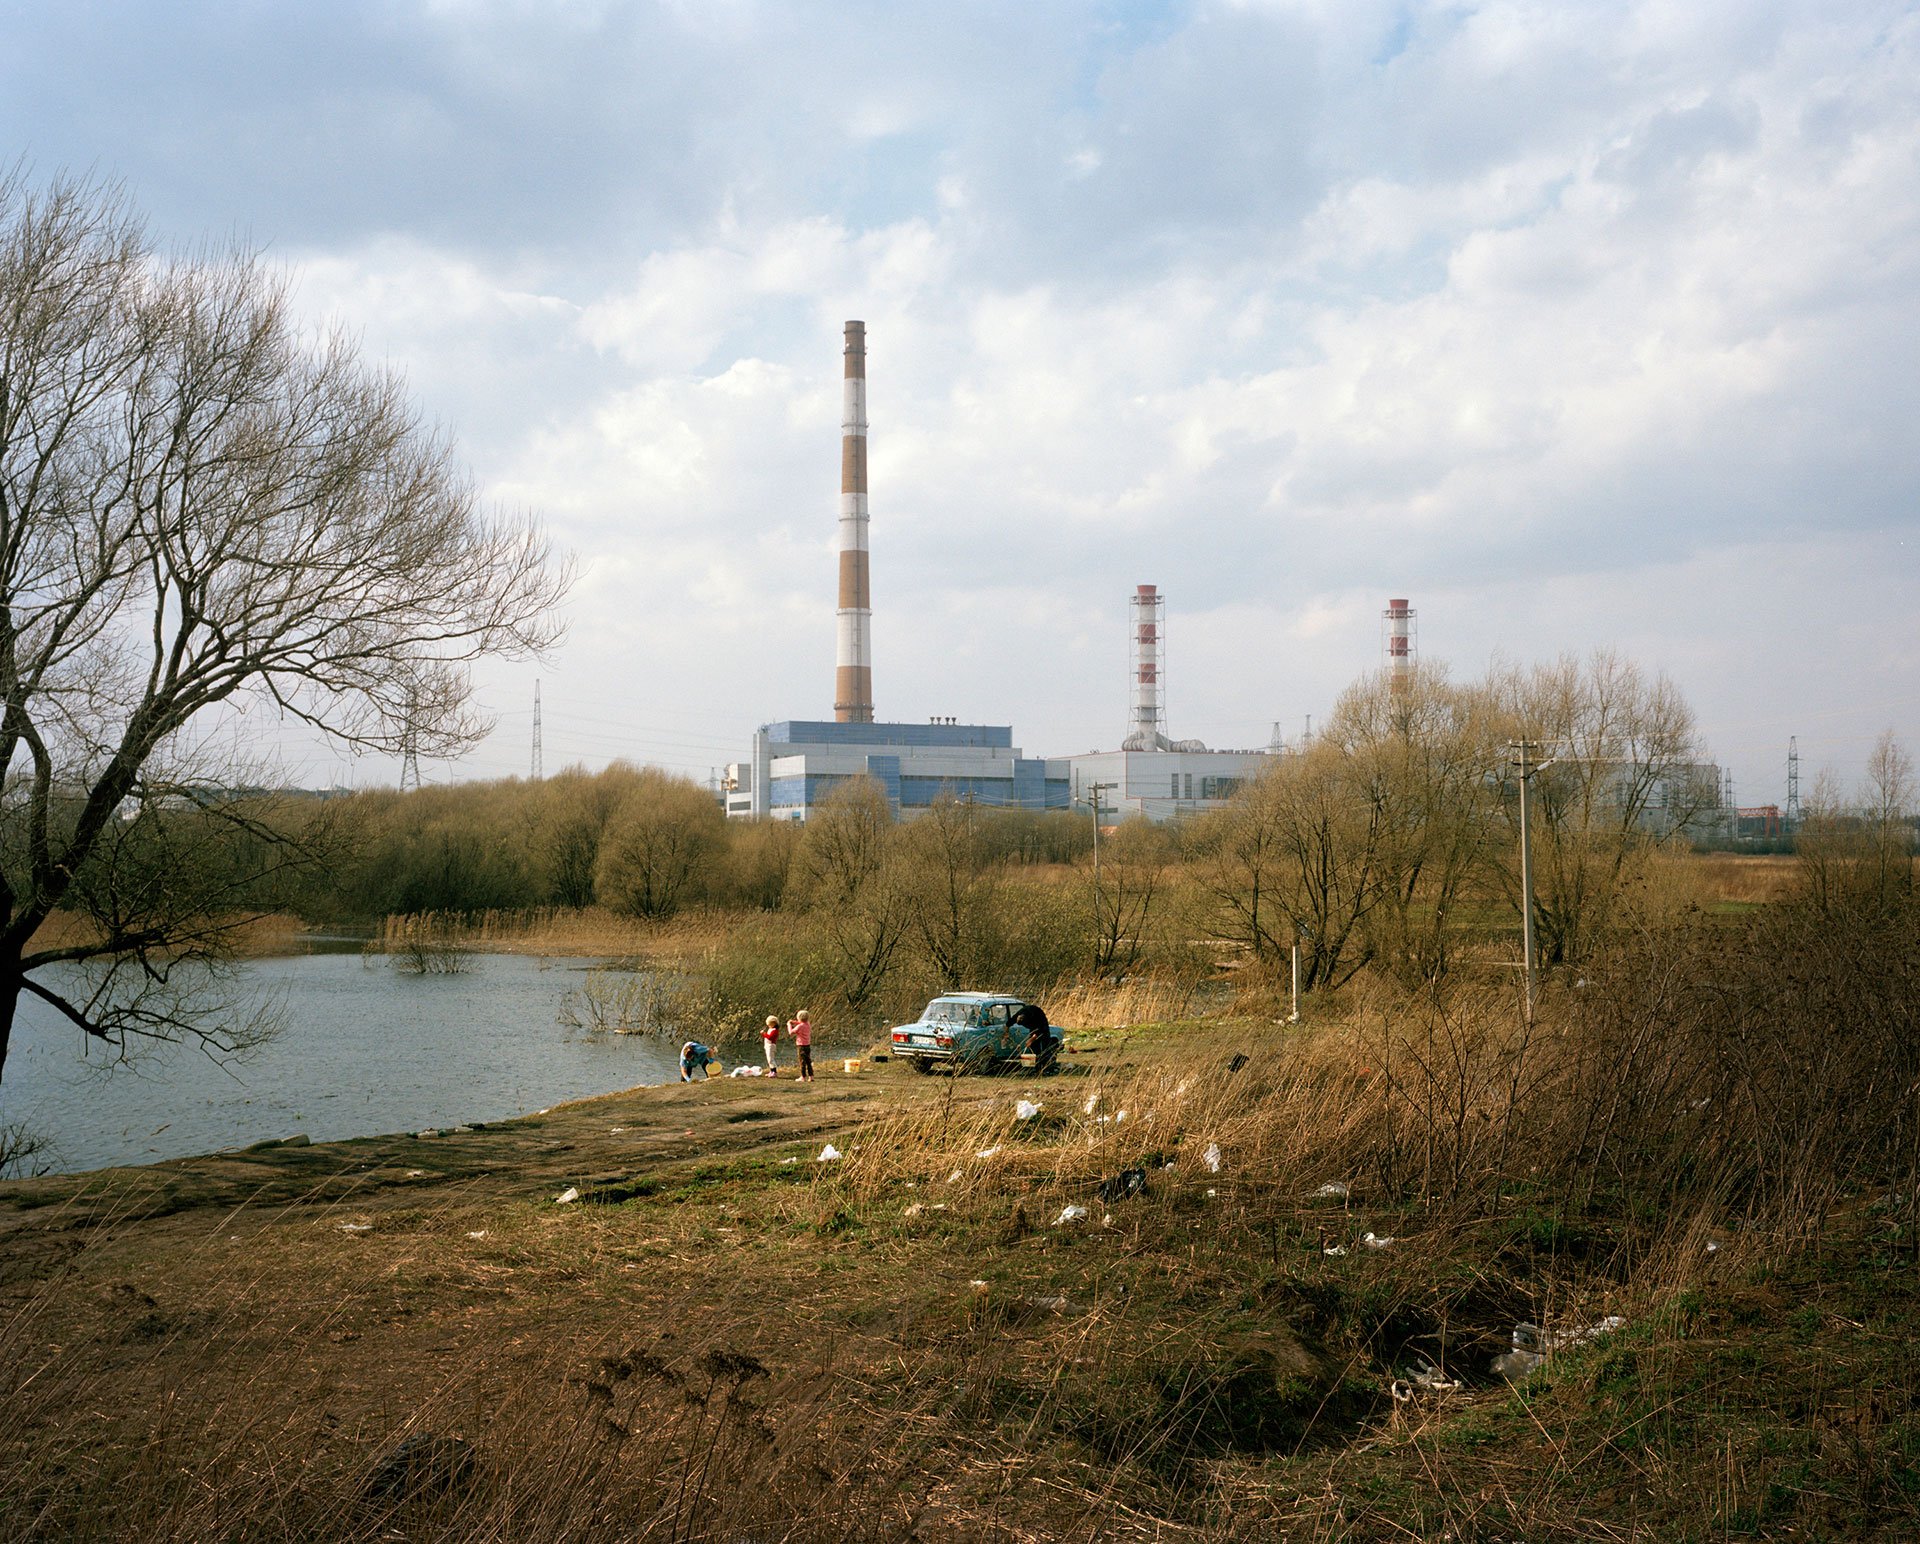 The town: Scenes from the decline of Romanian industry